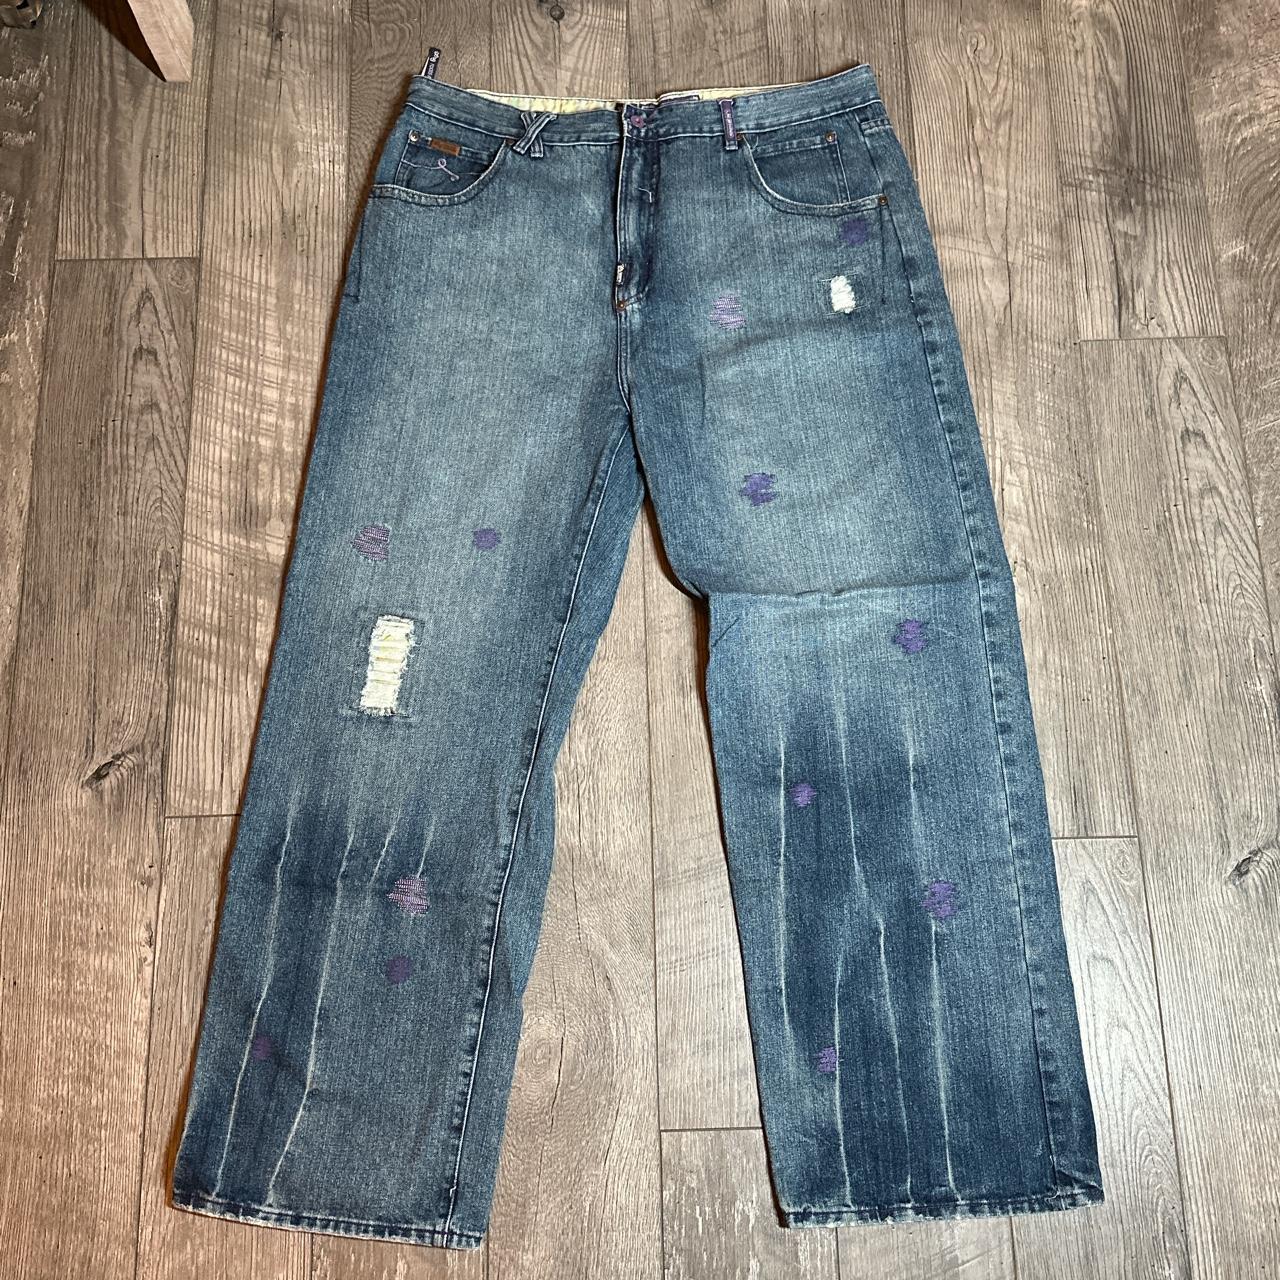 Lng embroidered distressed jeans 42x32 inches... - Depop